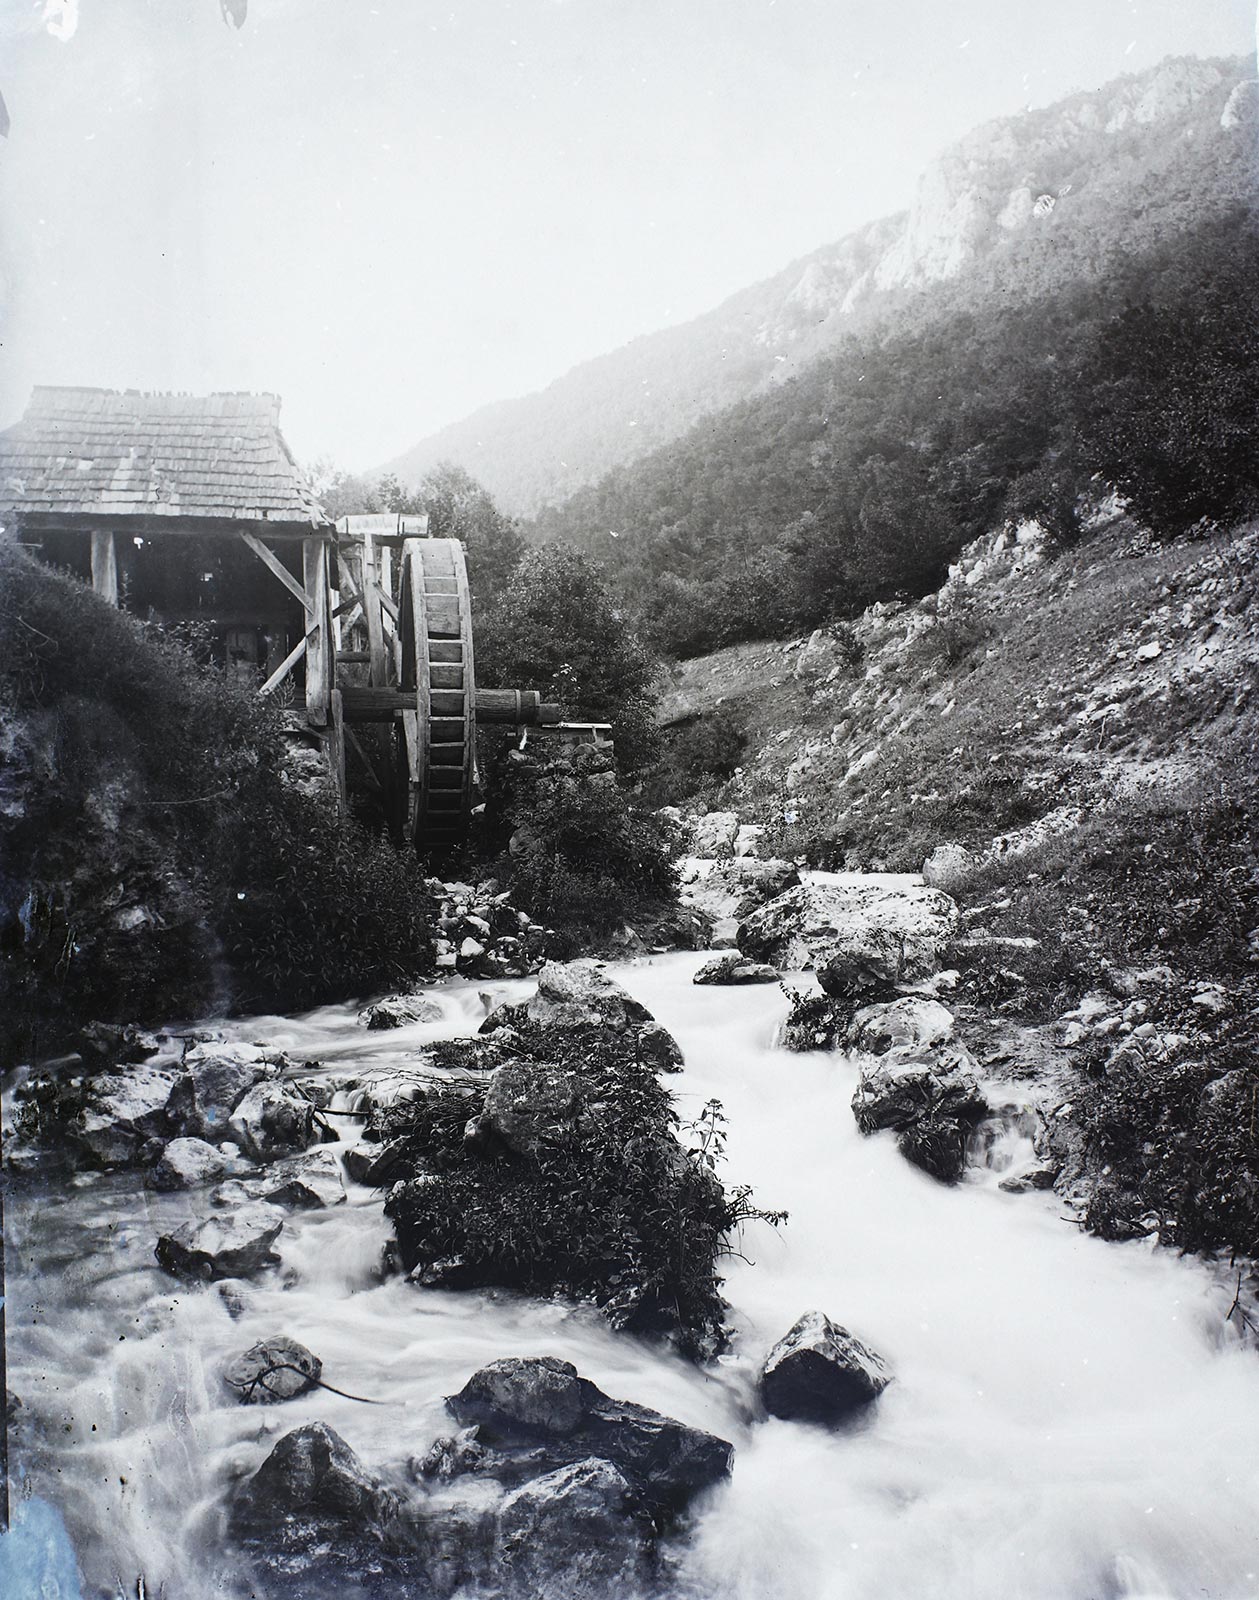 A watermill in the Highland (a former part of Hungary, now part of Slovakia) Photo: Fortepan / Lissák Tivadar